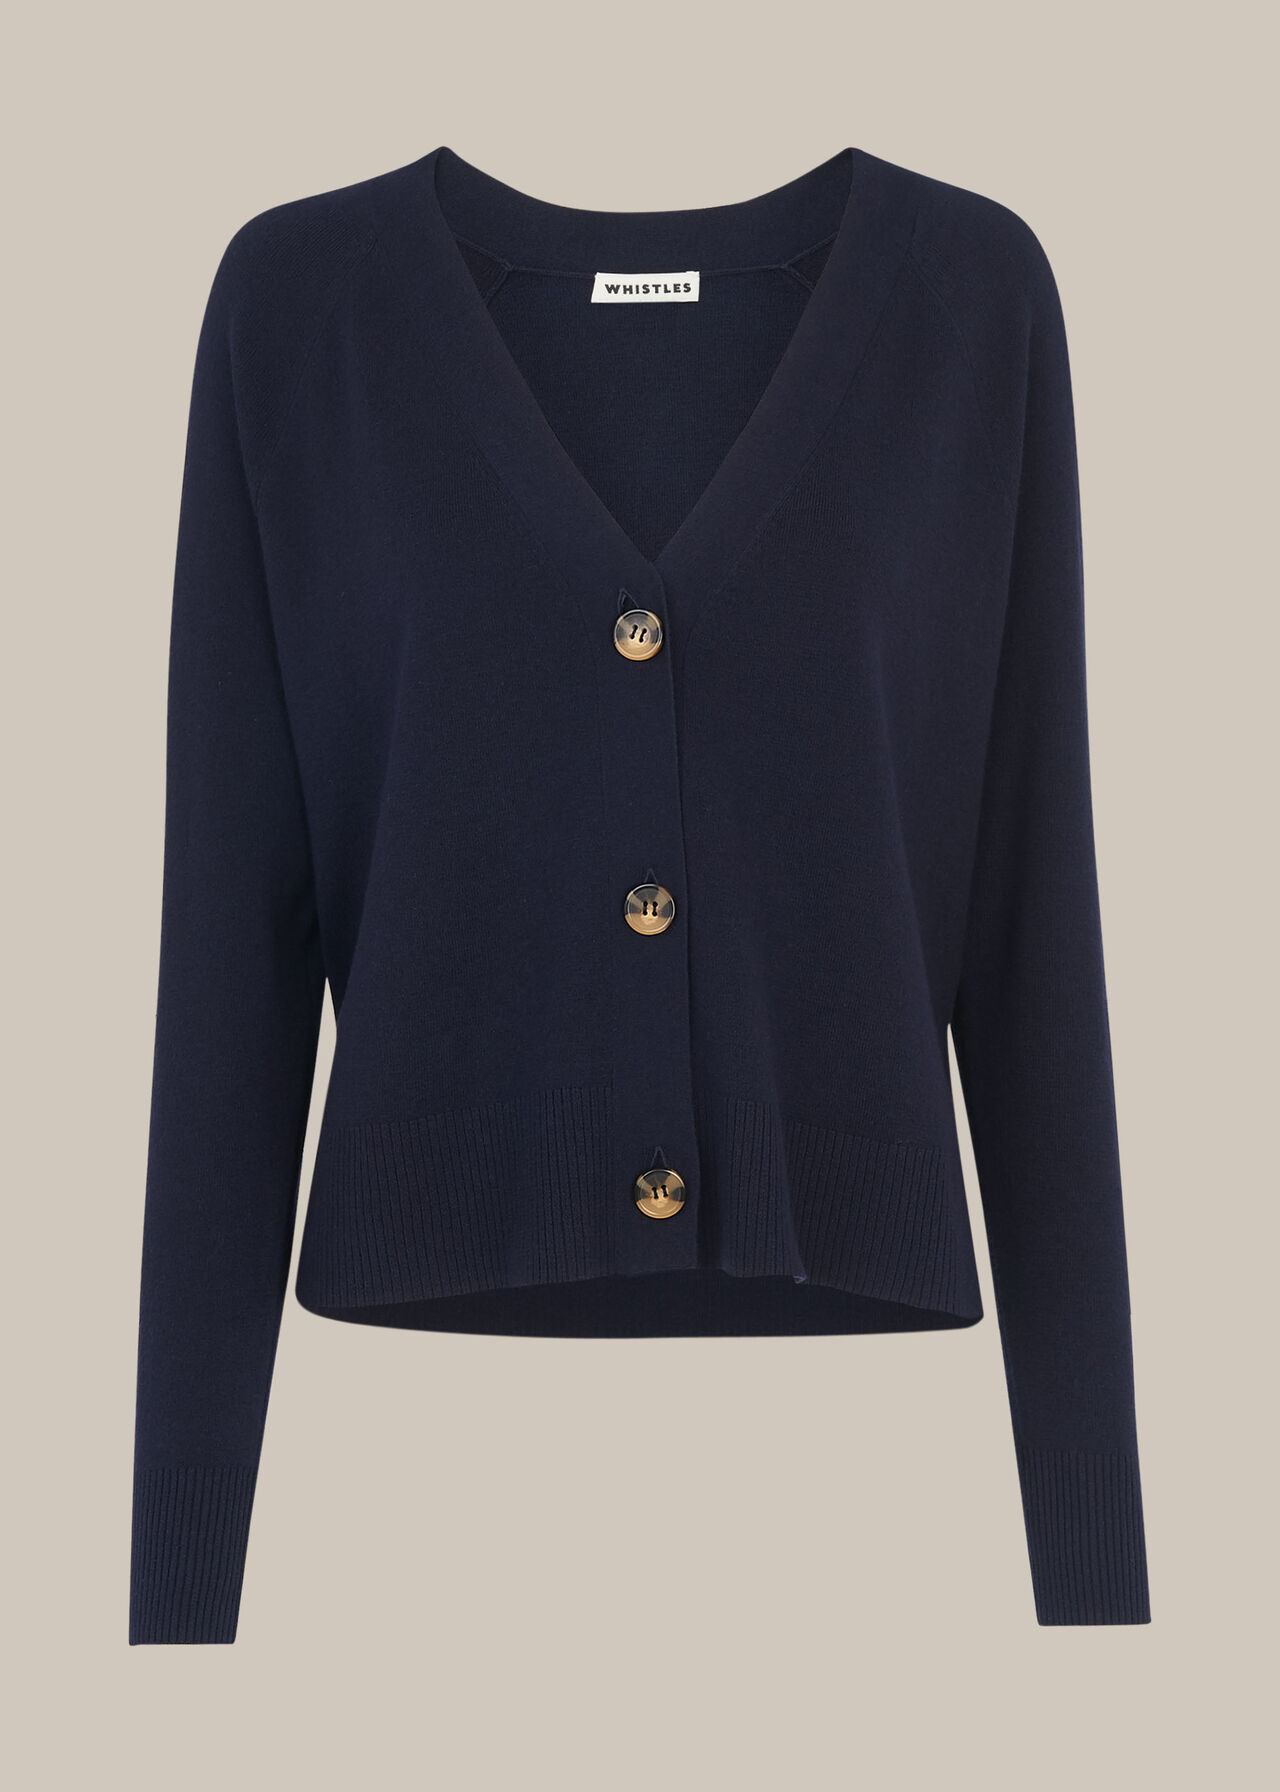 Navy Button Front Cardigan | WHISTLES | Whistles UK